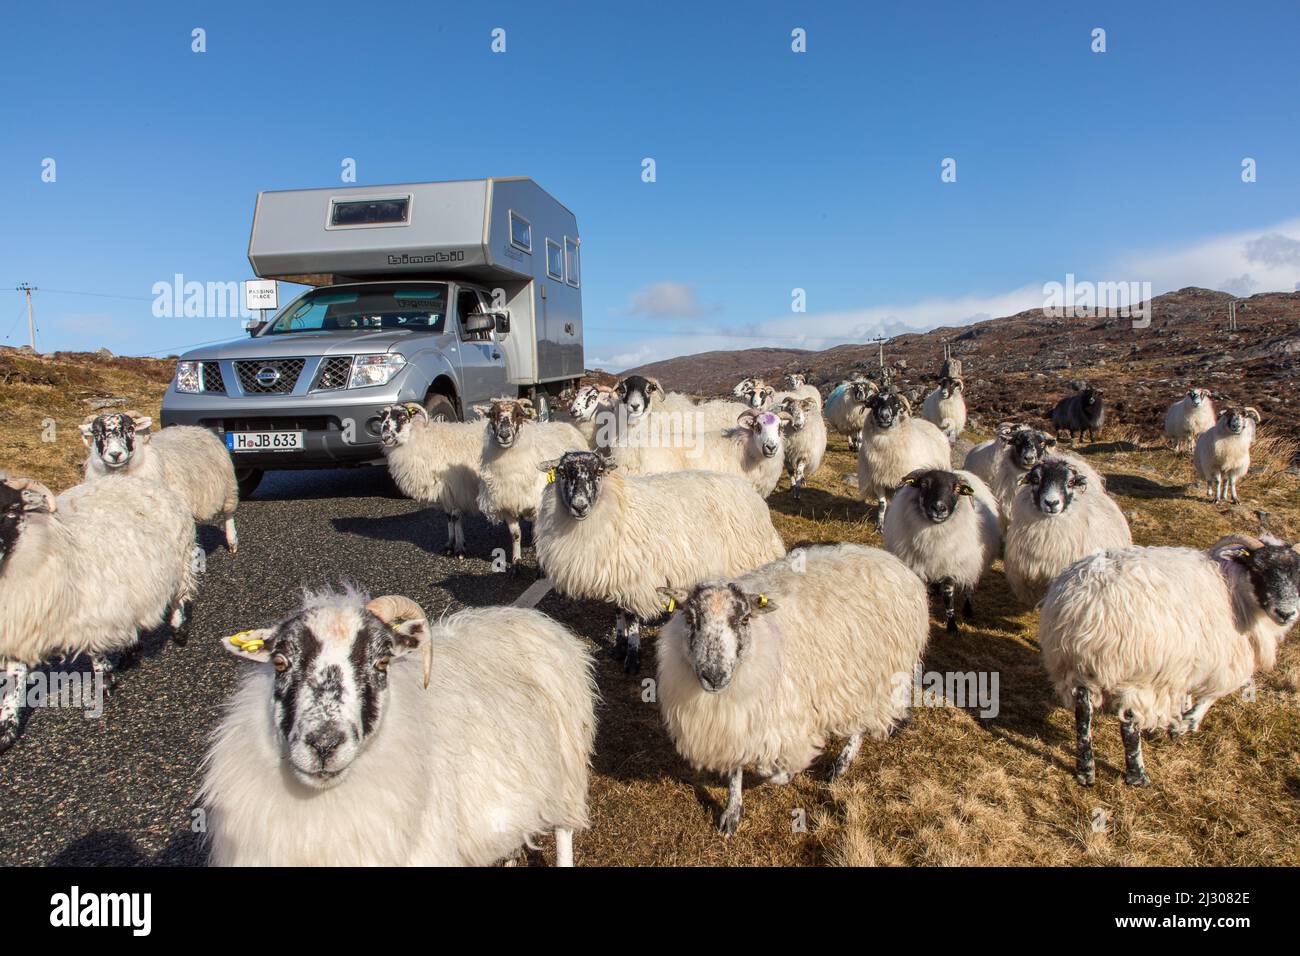 Sheep in front of camper, motorhome, four wheel drive bimobile, Golden Road, Isle of Harris, Outer Hebrides, Scotland UK Stock Photo